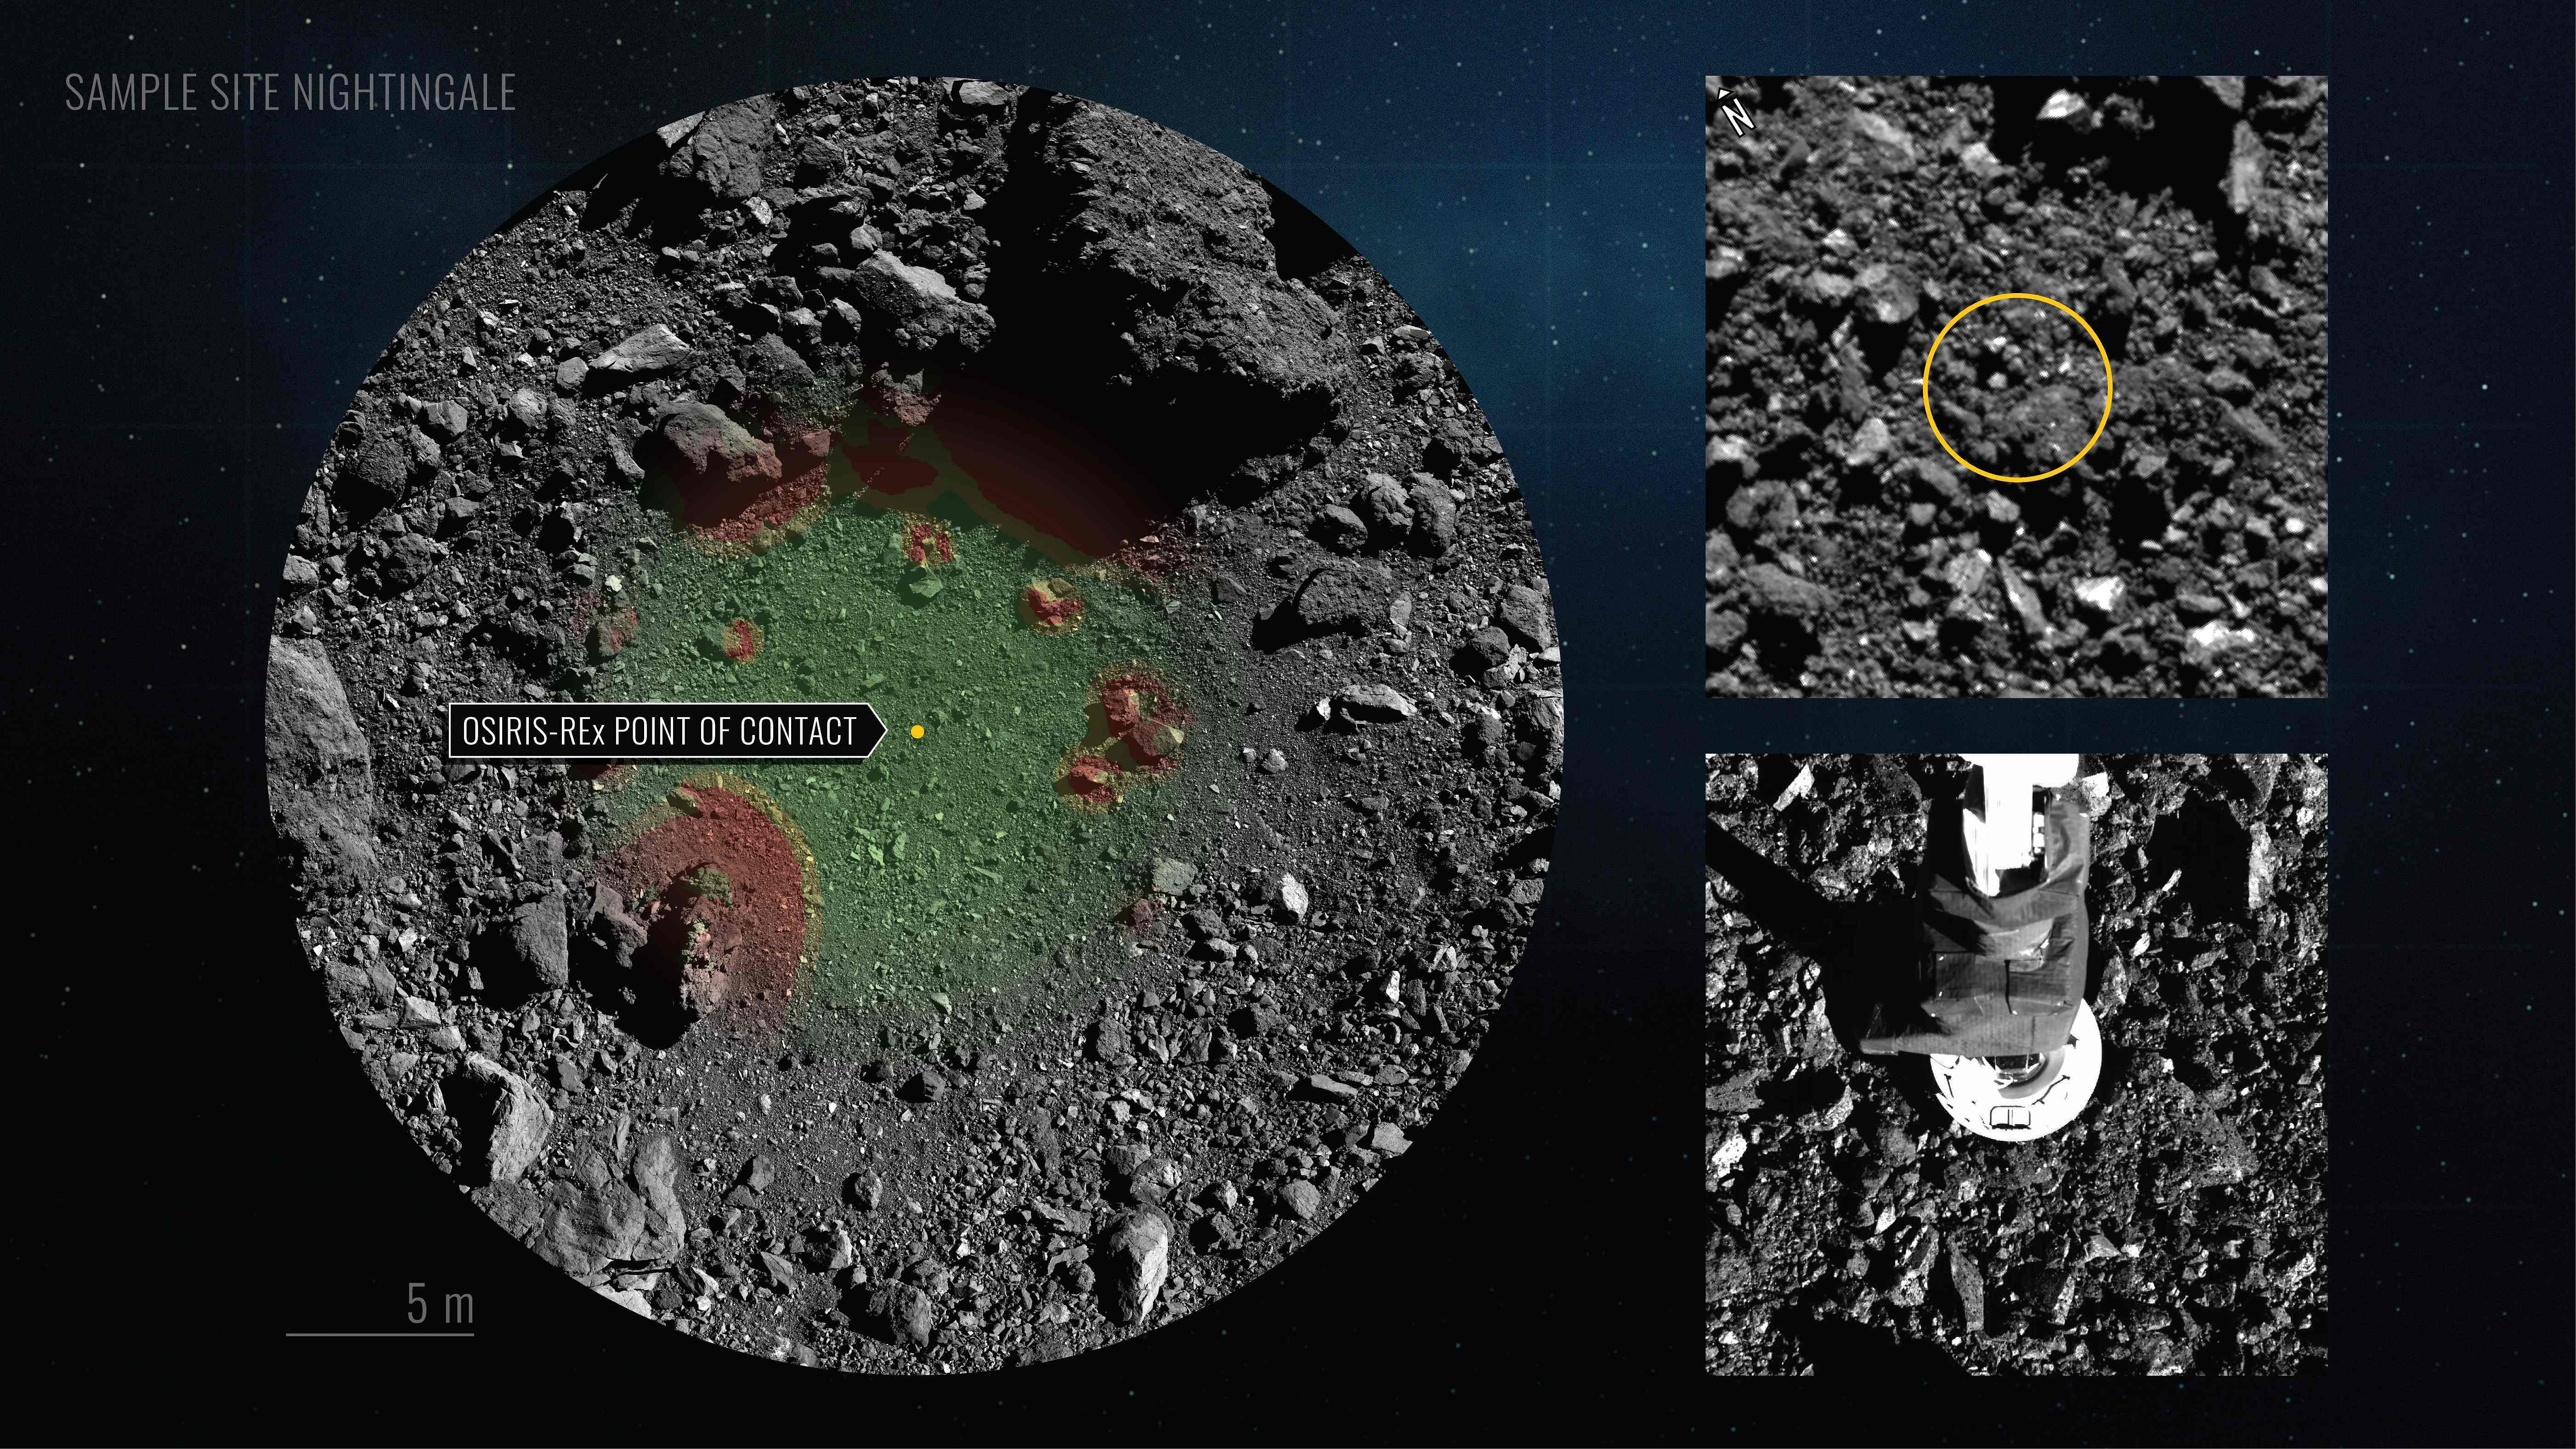 This NASA handout image obtained on October 21, 2020 shows Nightingale Hazard Map and TAG Location (L-top R) and NASA's robotic arm from spacecraft Osiris-Rex (bottom R) making contact with asteroid Bennu to collect samples. - After a four-year journey, NASA's robotic spacecraft Osiris-Rex briefly touched down on asteroid Bennu's boulder-strewn surface on Tuesday to collect rock and dust samples in a precision operation 200 million miles (330 million kilometers) from Earth. Credit: AFP Photo